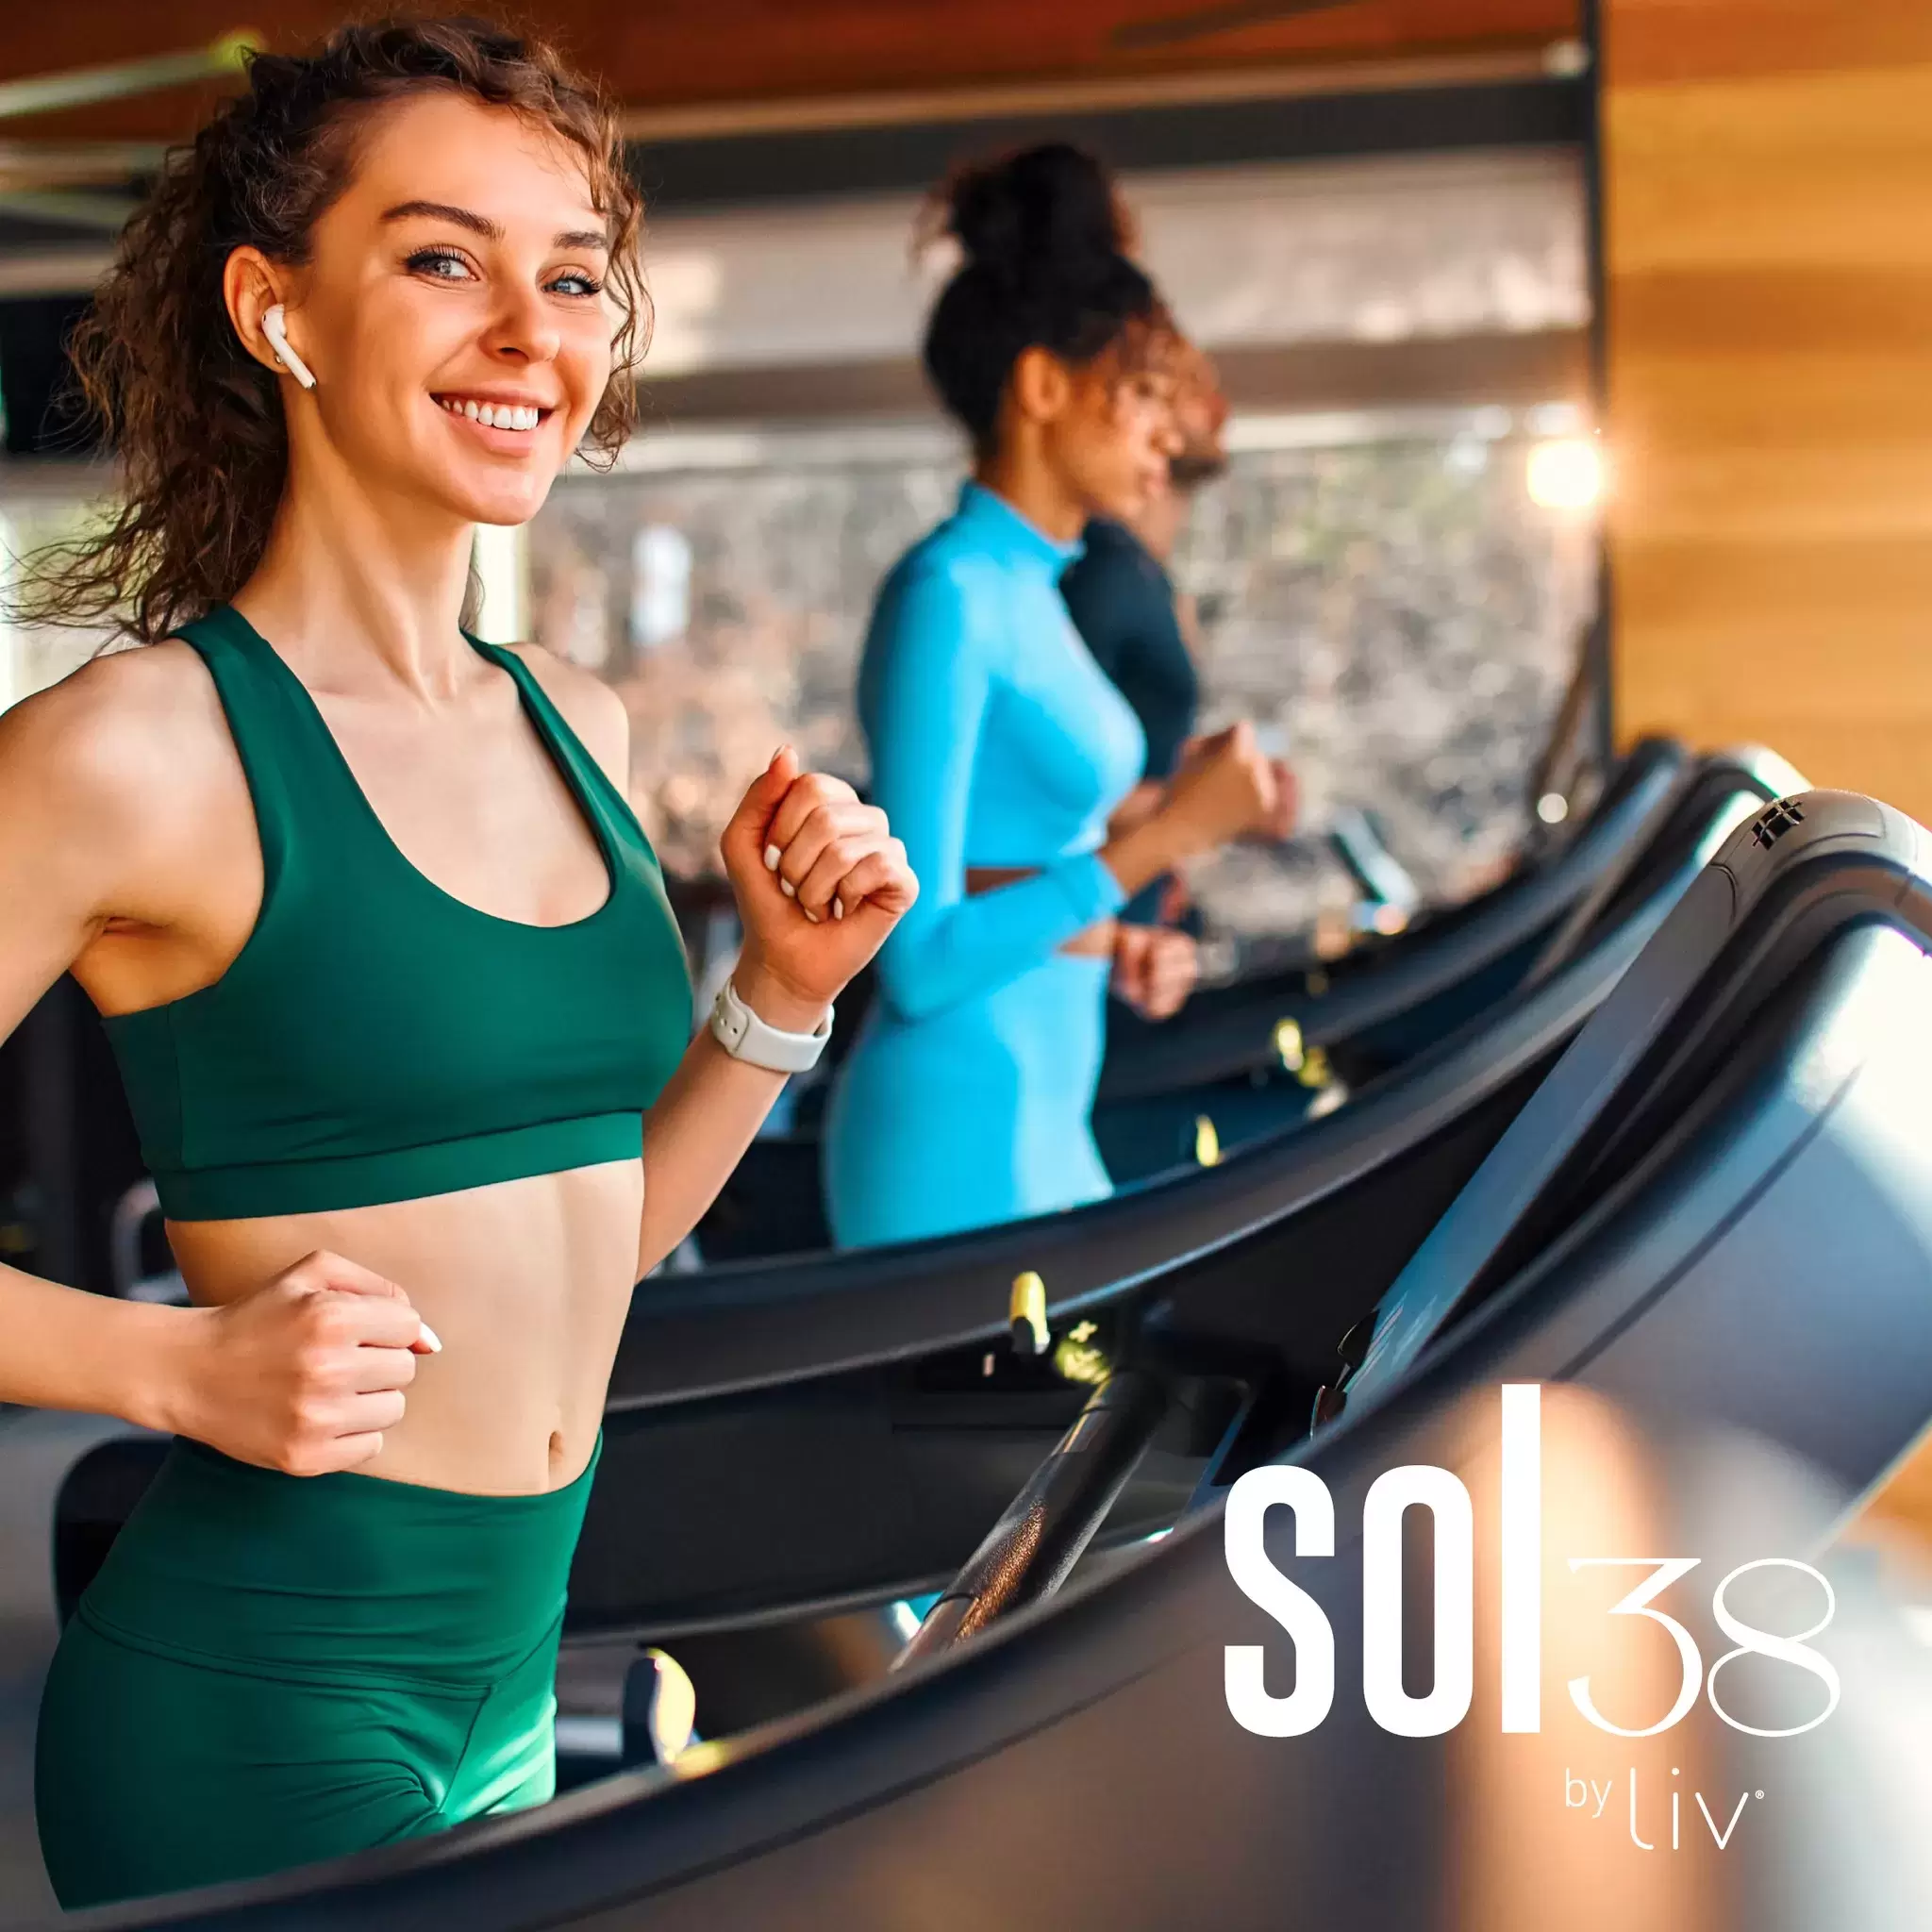 Whether you're a cardio queen or a yogi at heart, our state-of-the-art fitness center has everyone covered! 🏋️‍♀️🧘‍♂️ 

From top-of-the-line cardio equipment to our yoga studio, we've got all you need to conquer your fitness goals in style! 

Hop on our website to explore amenities, floor plans, features and so much more. ➡ www.sol38byliv.com